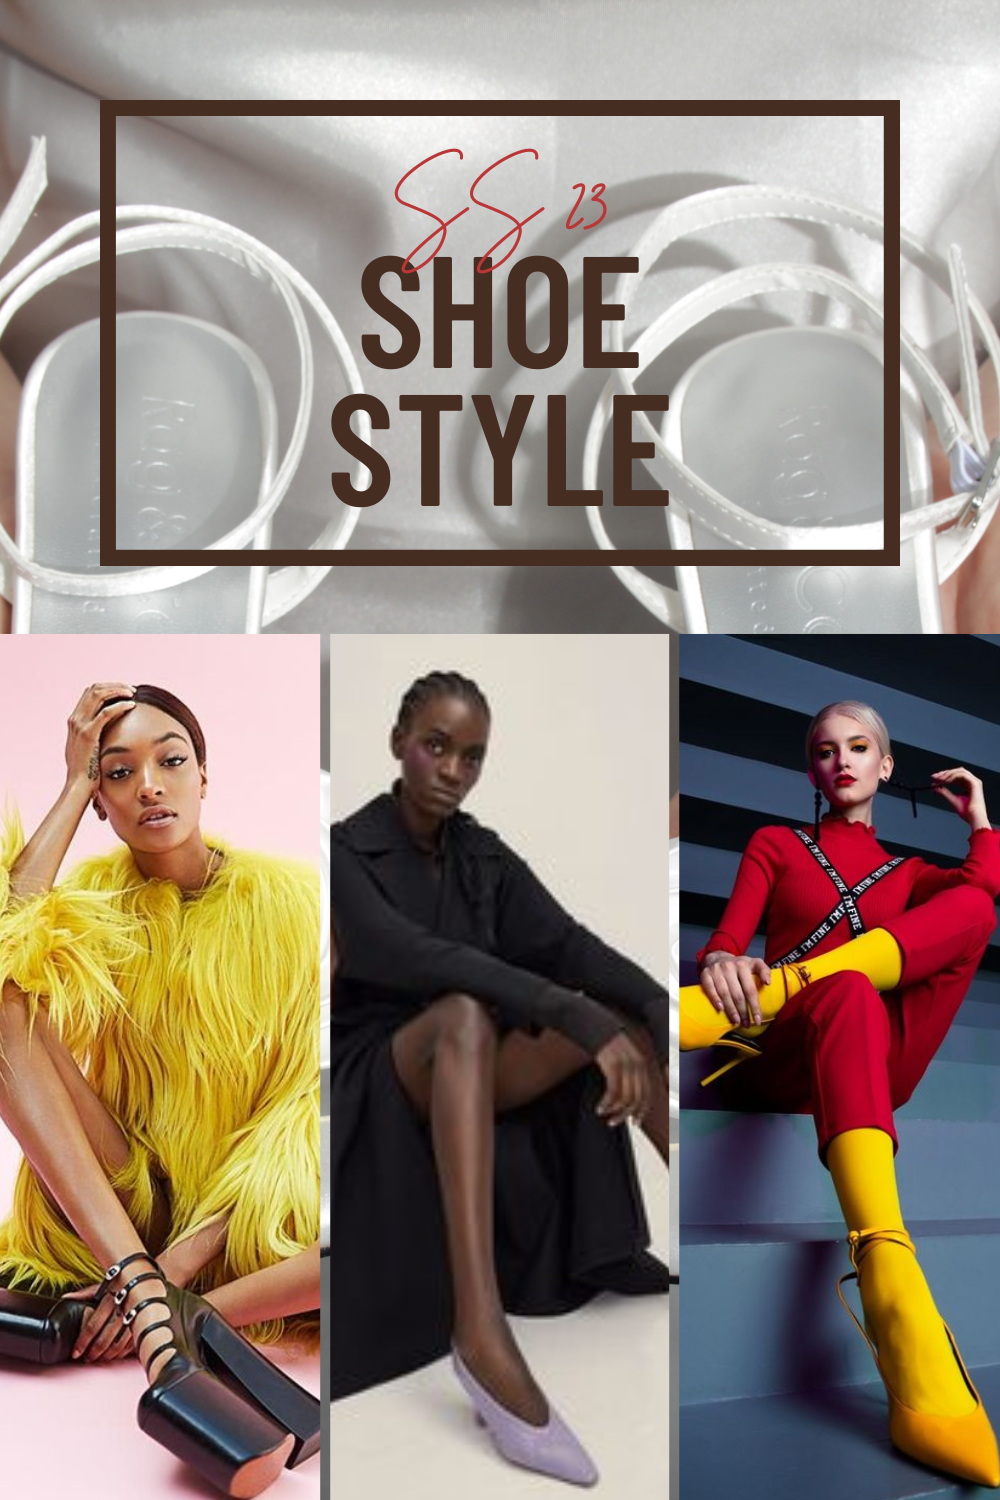 SS 23 Shoe style